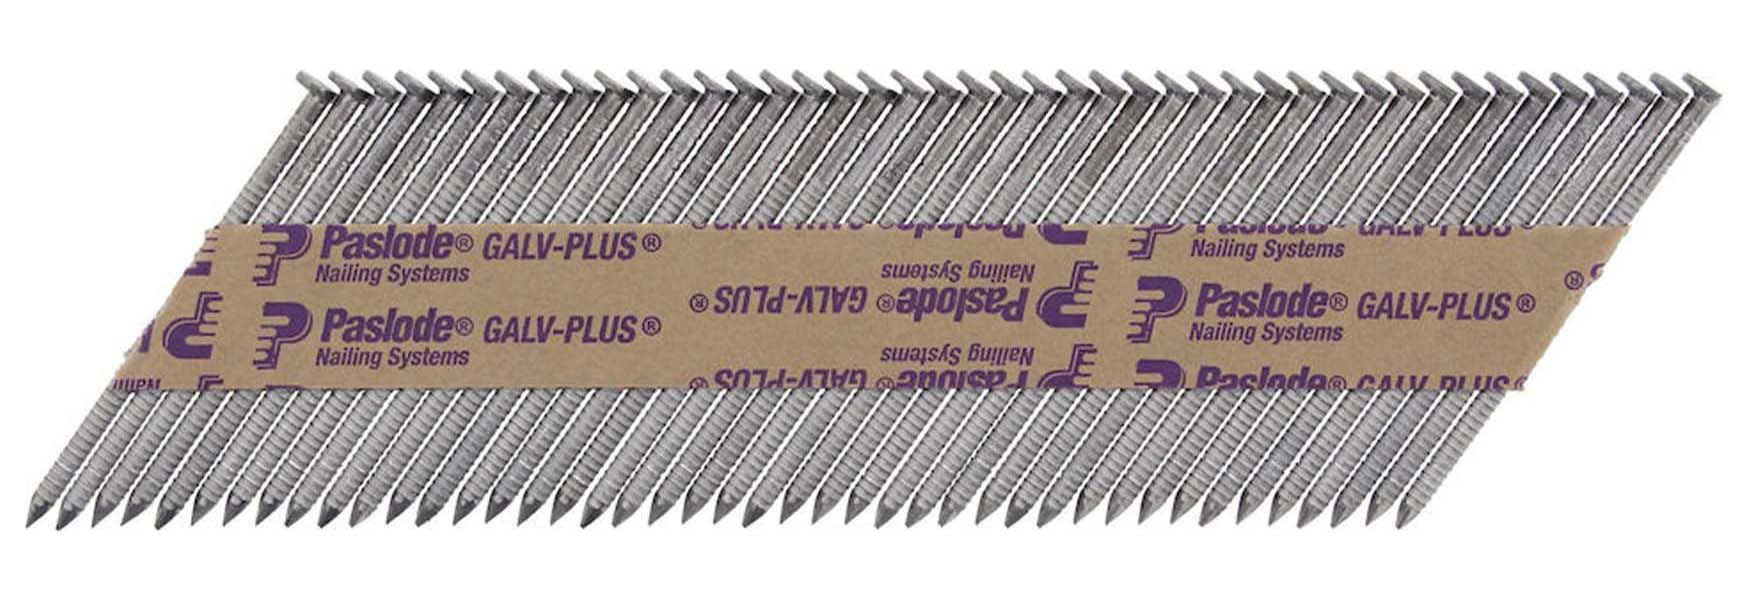 Image of Paslode IM350 2.8mm x 51mm Galv-Plus Collated Box of 1100 Nails + 1 Fuel Cell